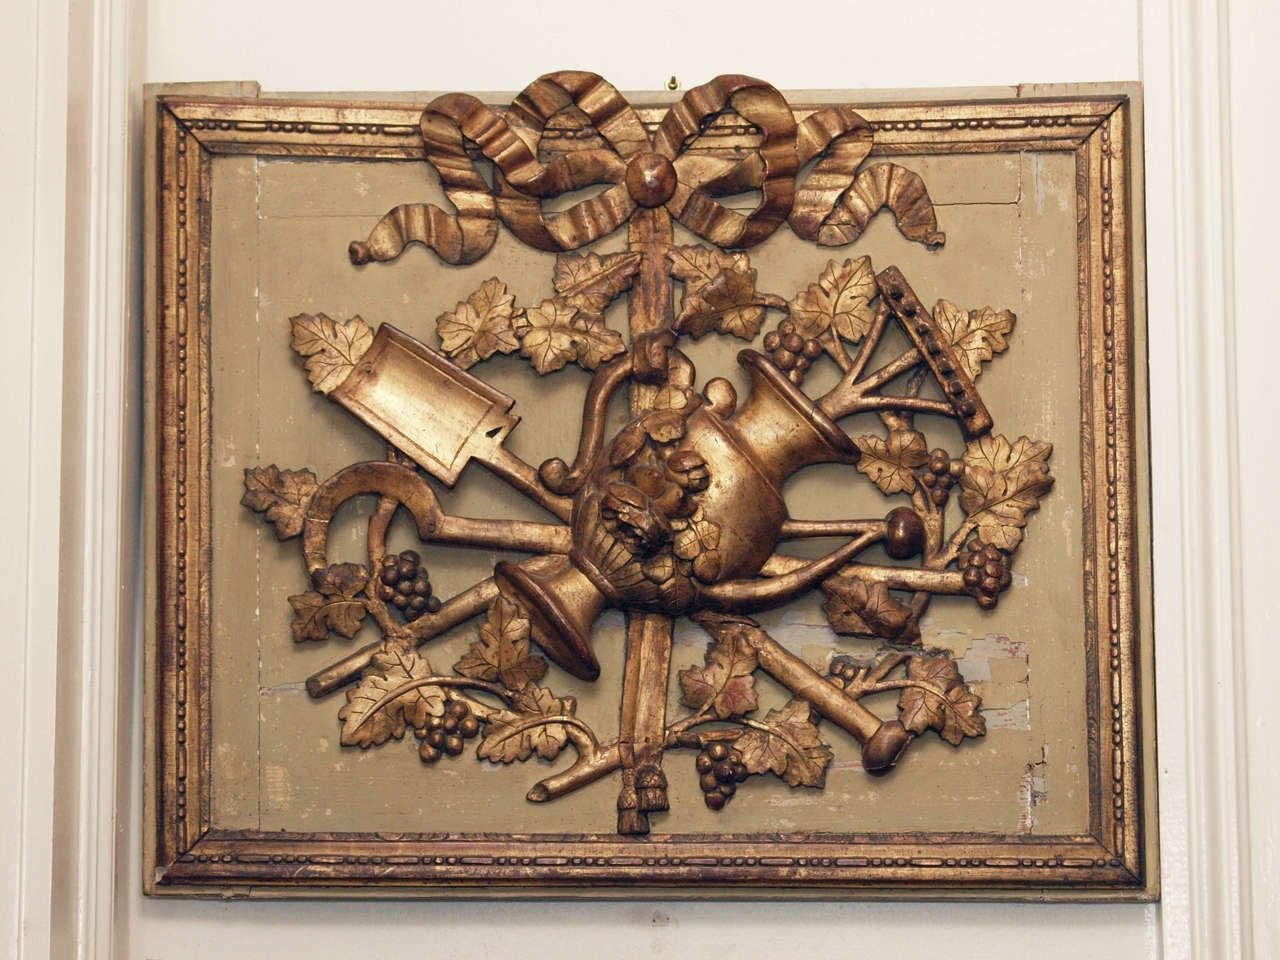 French Louis XVI Gilt Carved Wood Architectural Overdoor Plaque of Garden Implements and ribbon. Exceptional quality.